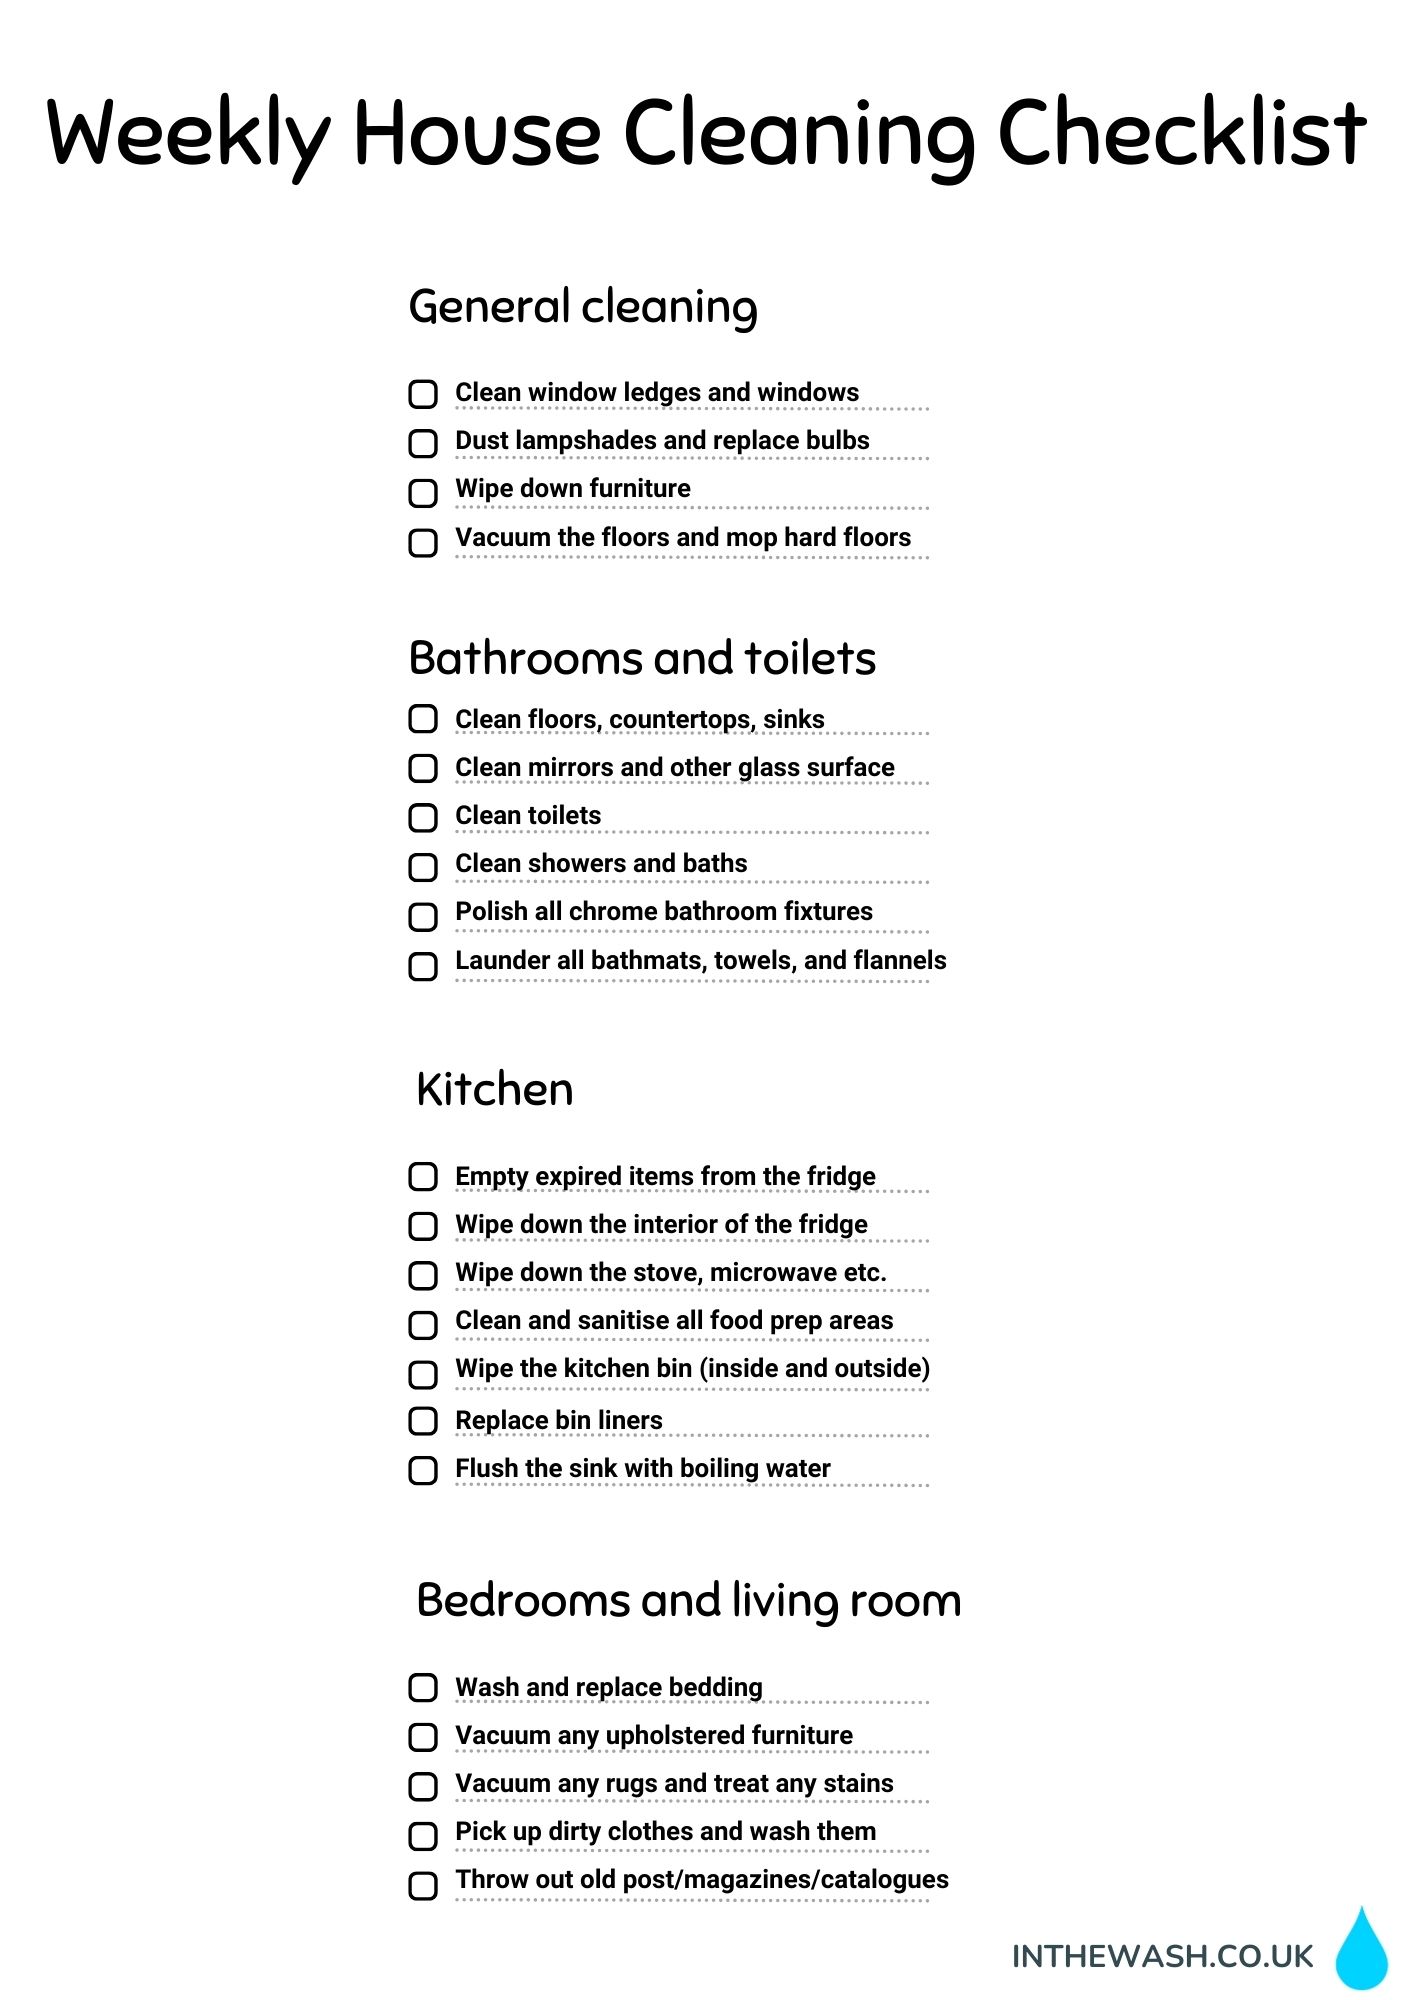 Weekly house cleaning checklist